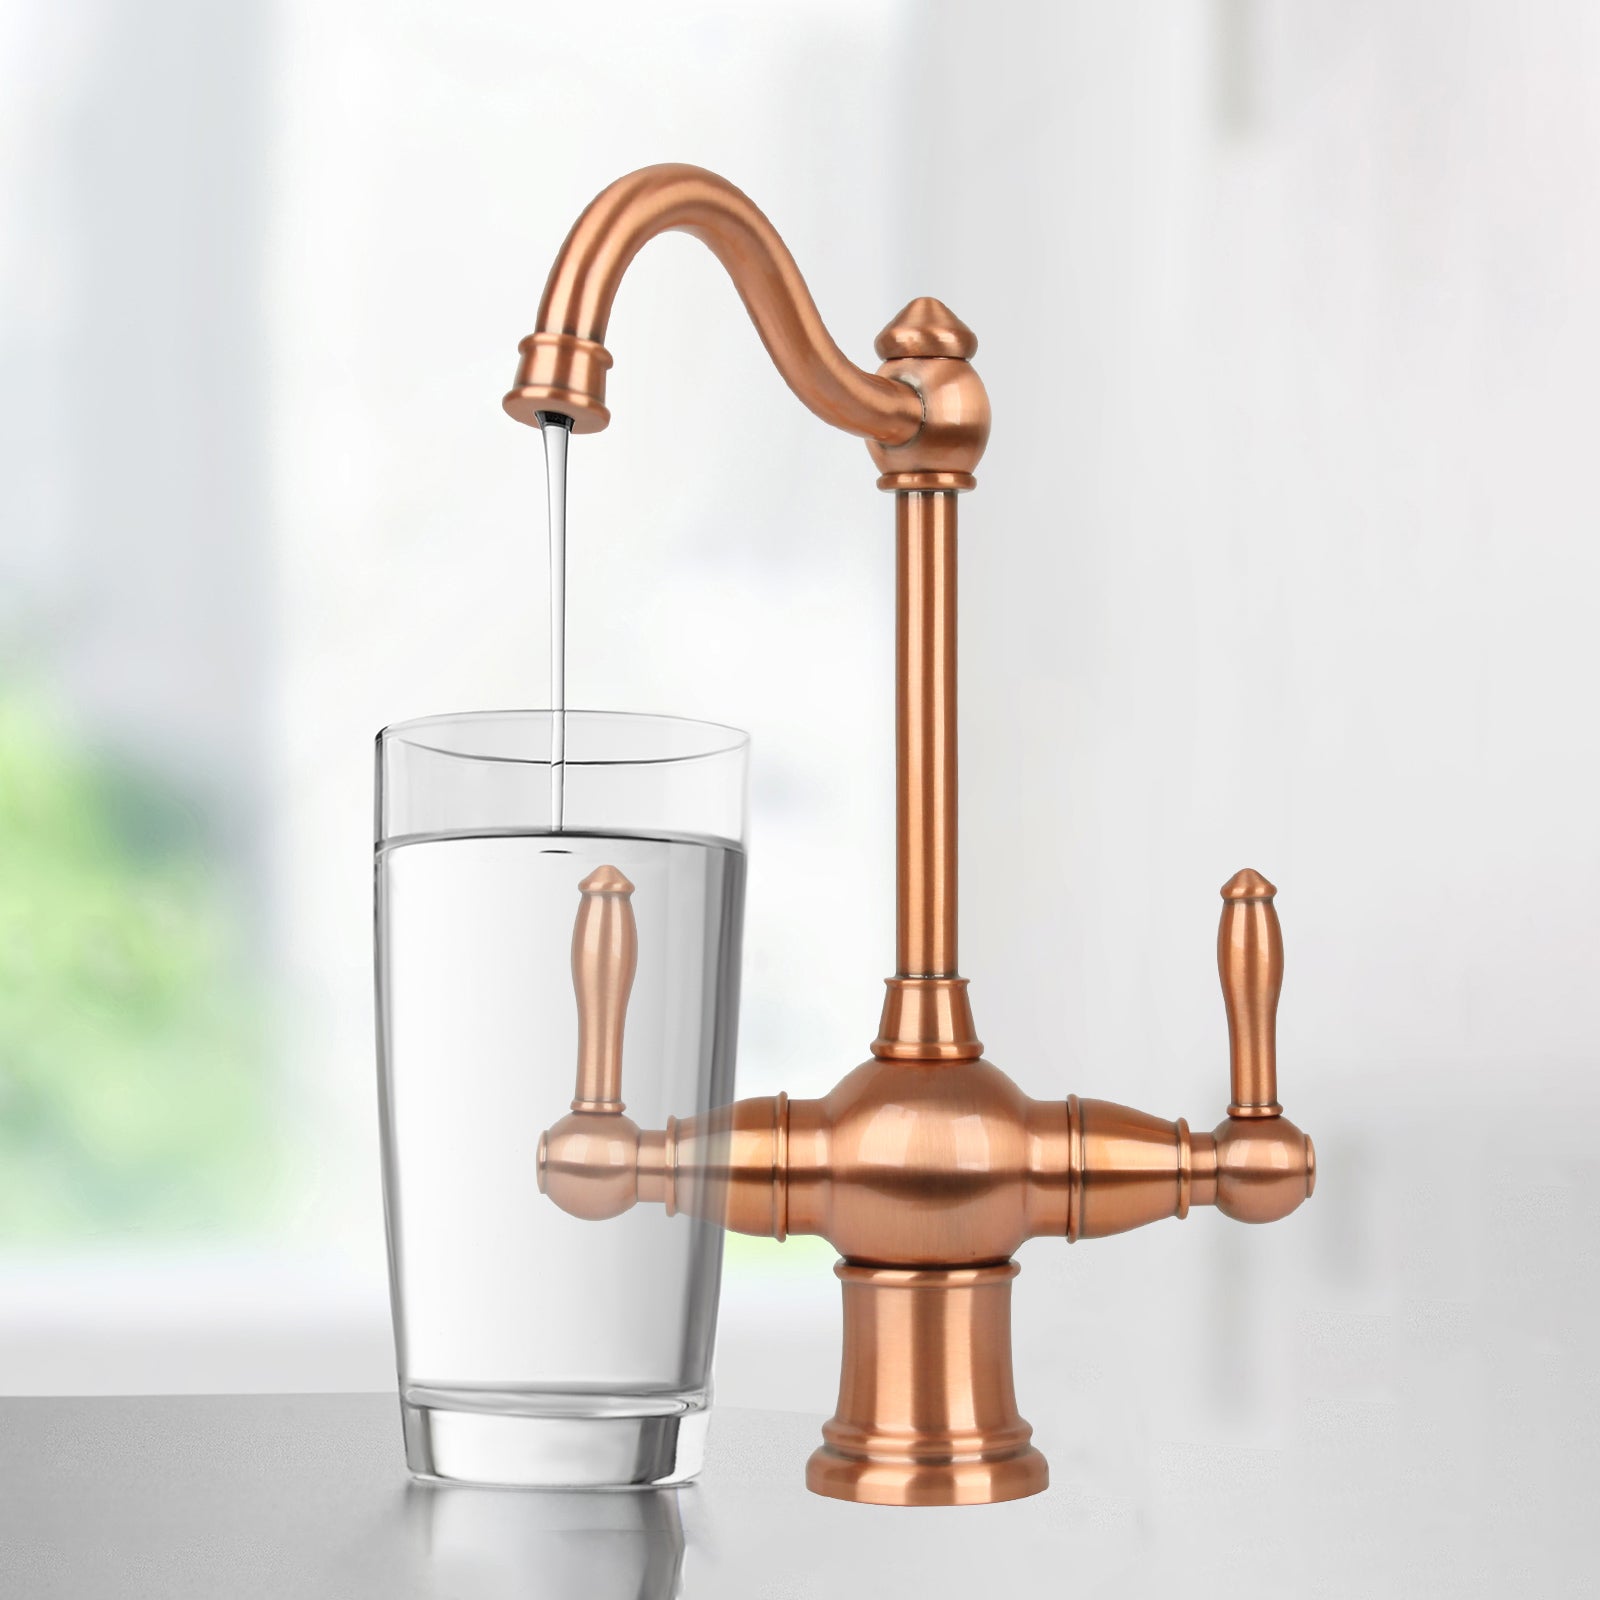 Two-Handles Copper Drinking Water Filter Faucet, Dual Lever Hot and Cold Water Faucet for Instant Hot Water Tank Dispenser & Filtration System - AK96218A1-C